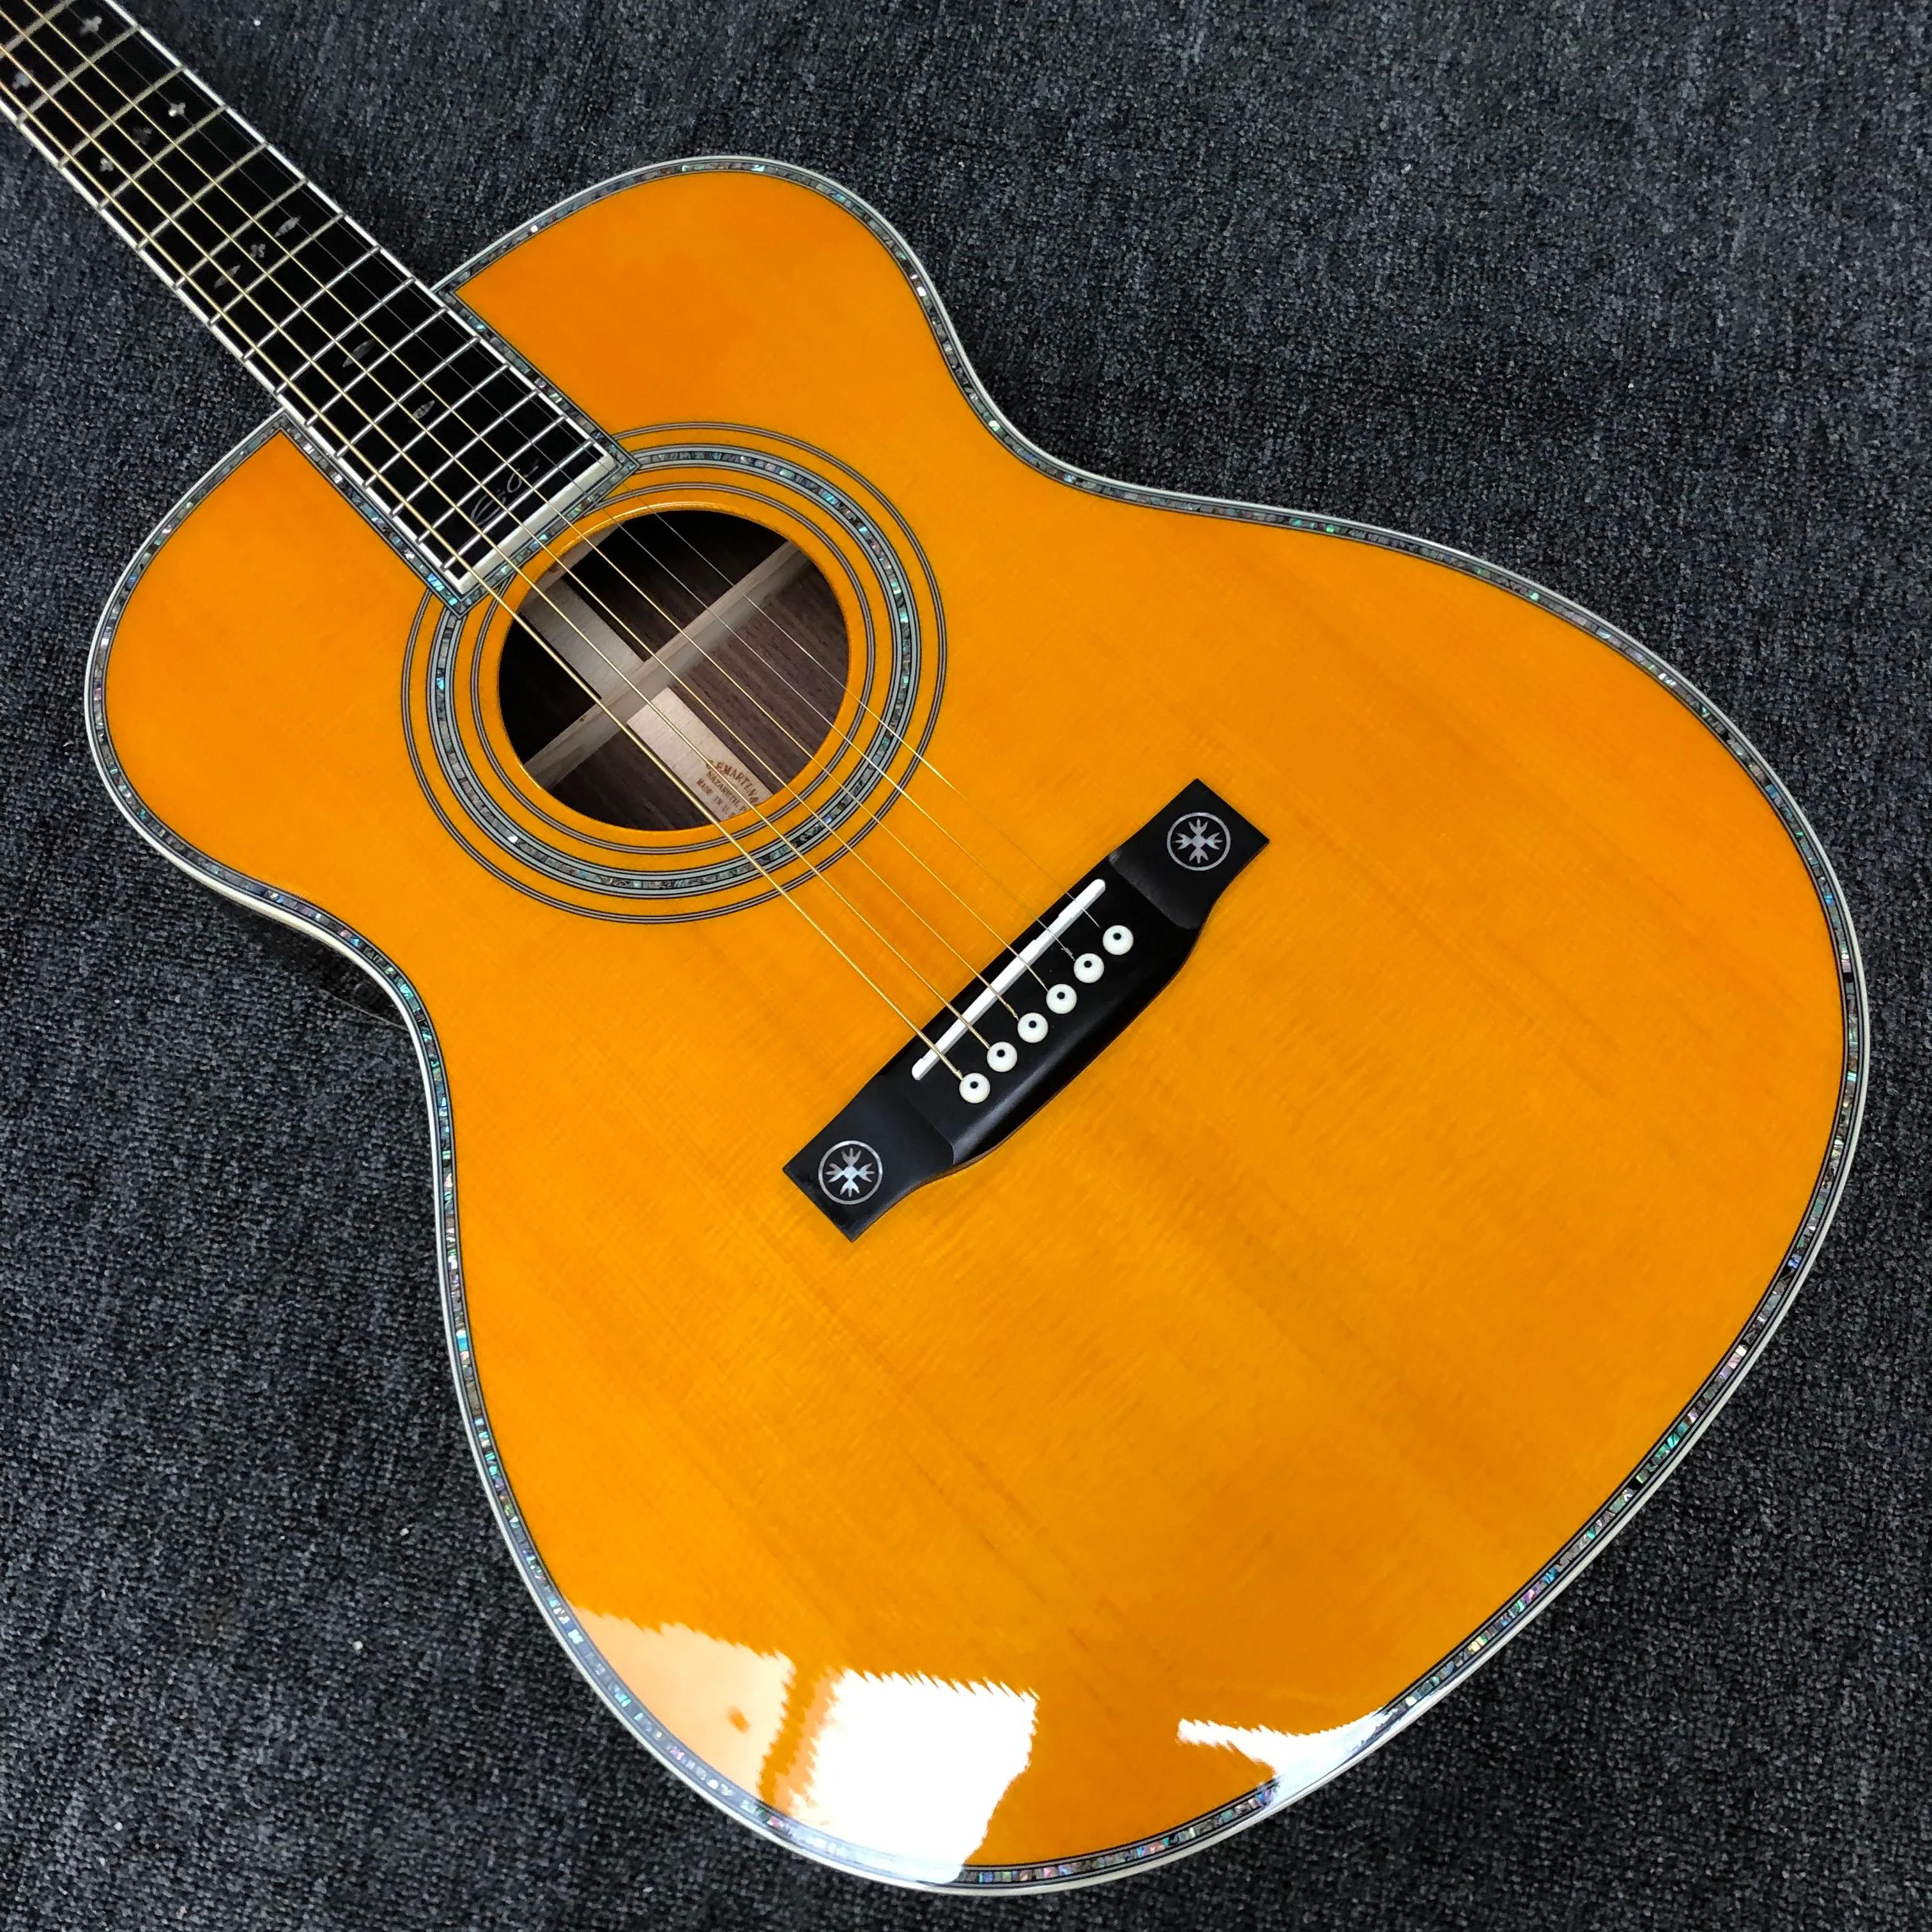 Kable blond top OM42 Acoustic Guitar Om42 Acoustic Electric Guitar Count Body Classic Acoustic Guitar Solid Top Darmowa wysyłka